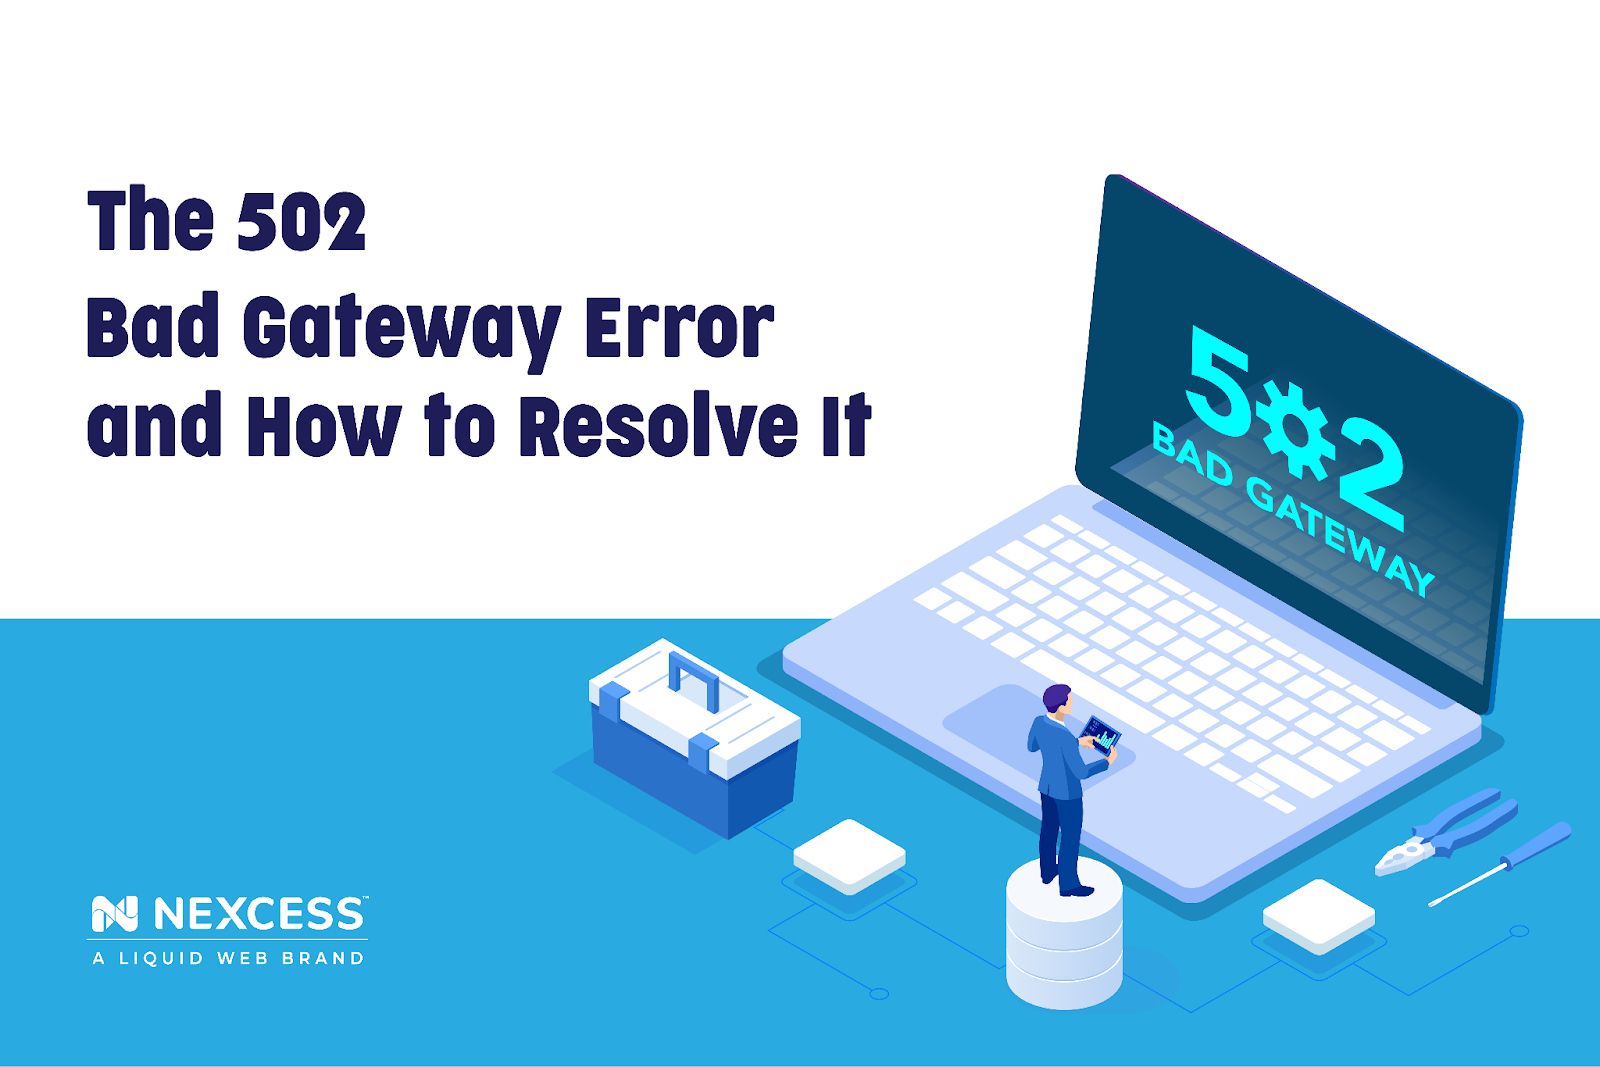 The 502 Bad Gateway Error and How To Resolve It.